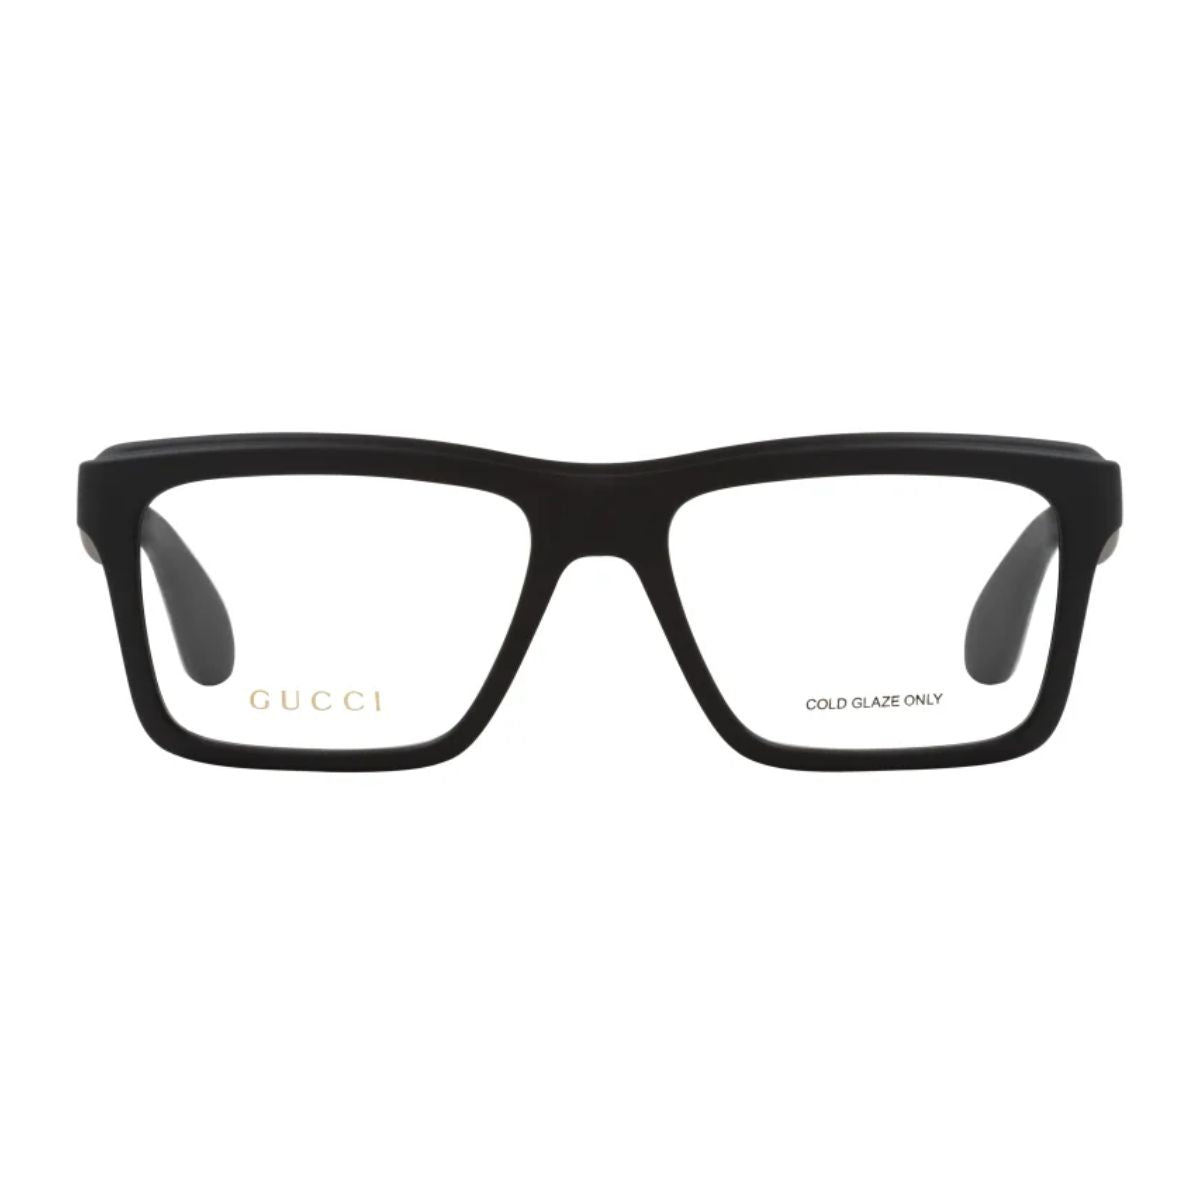 "Stylish Gucci 1573O 001 Frames for Men - Optorium's Exclusive Collection"